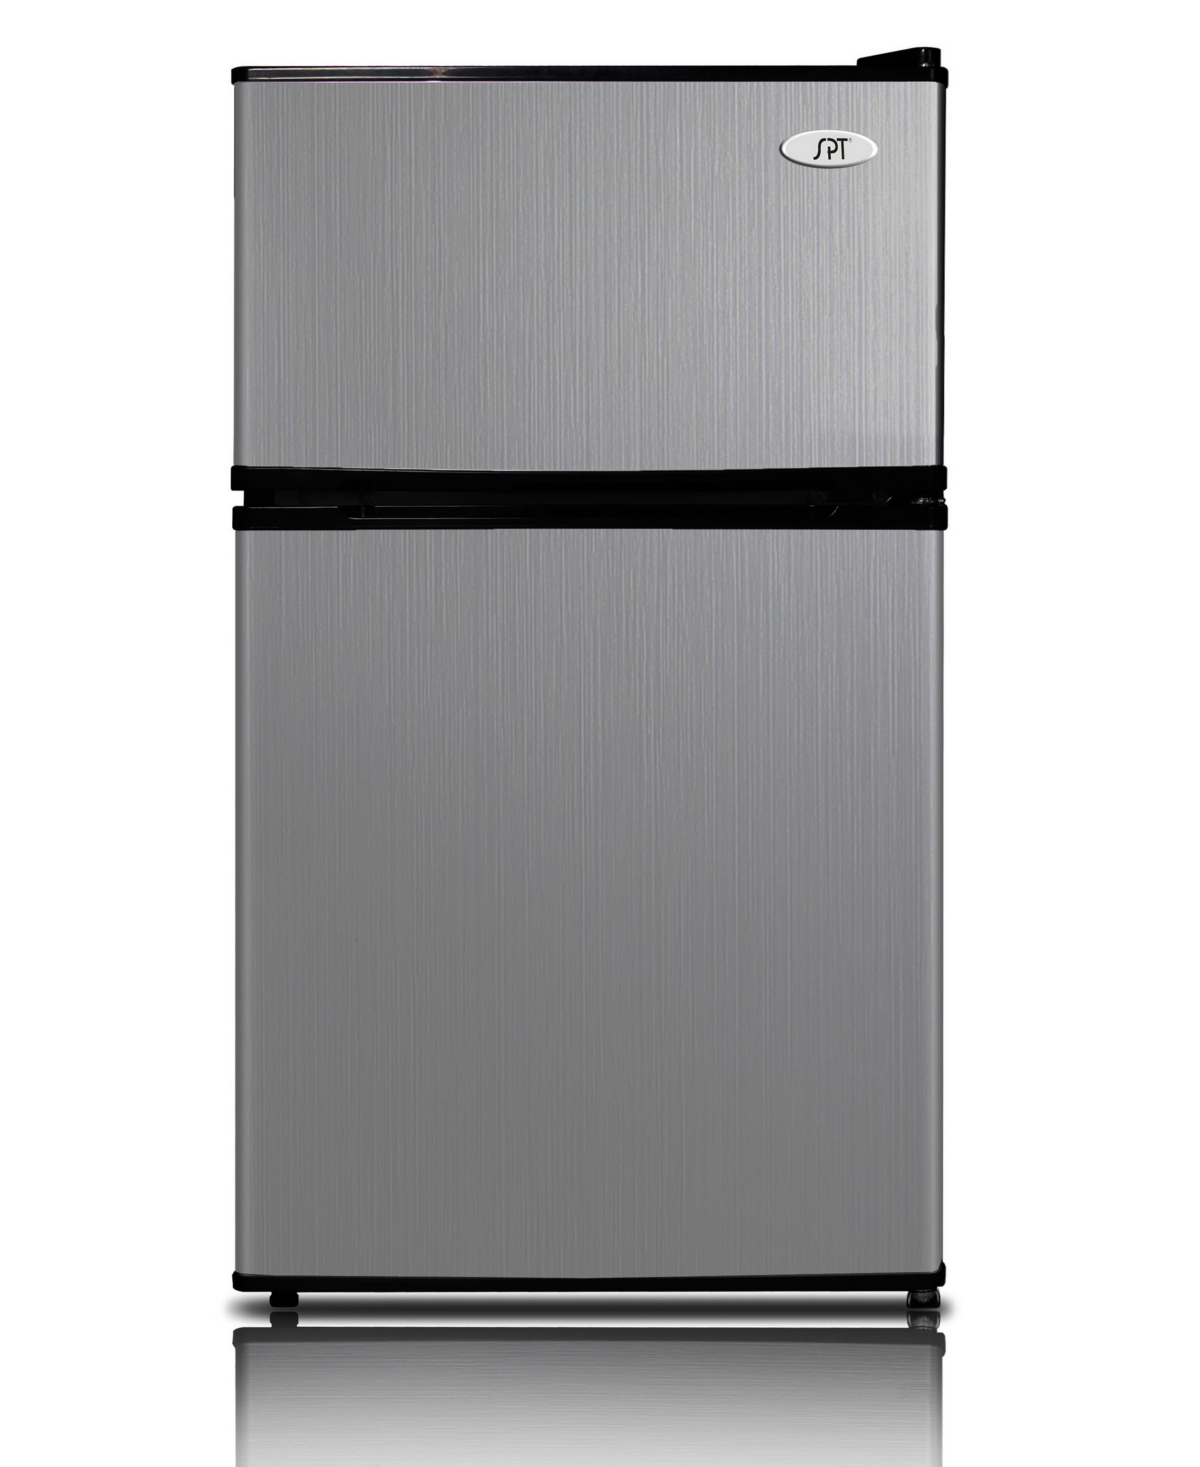 Spt 3.1 Cubic feet Double Door Refrigerator with Energy Star - Stainless...